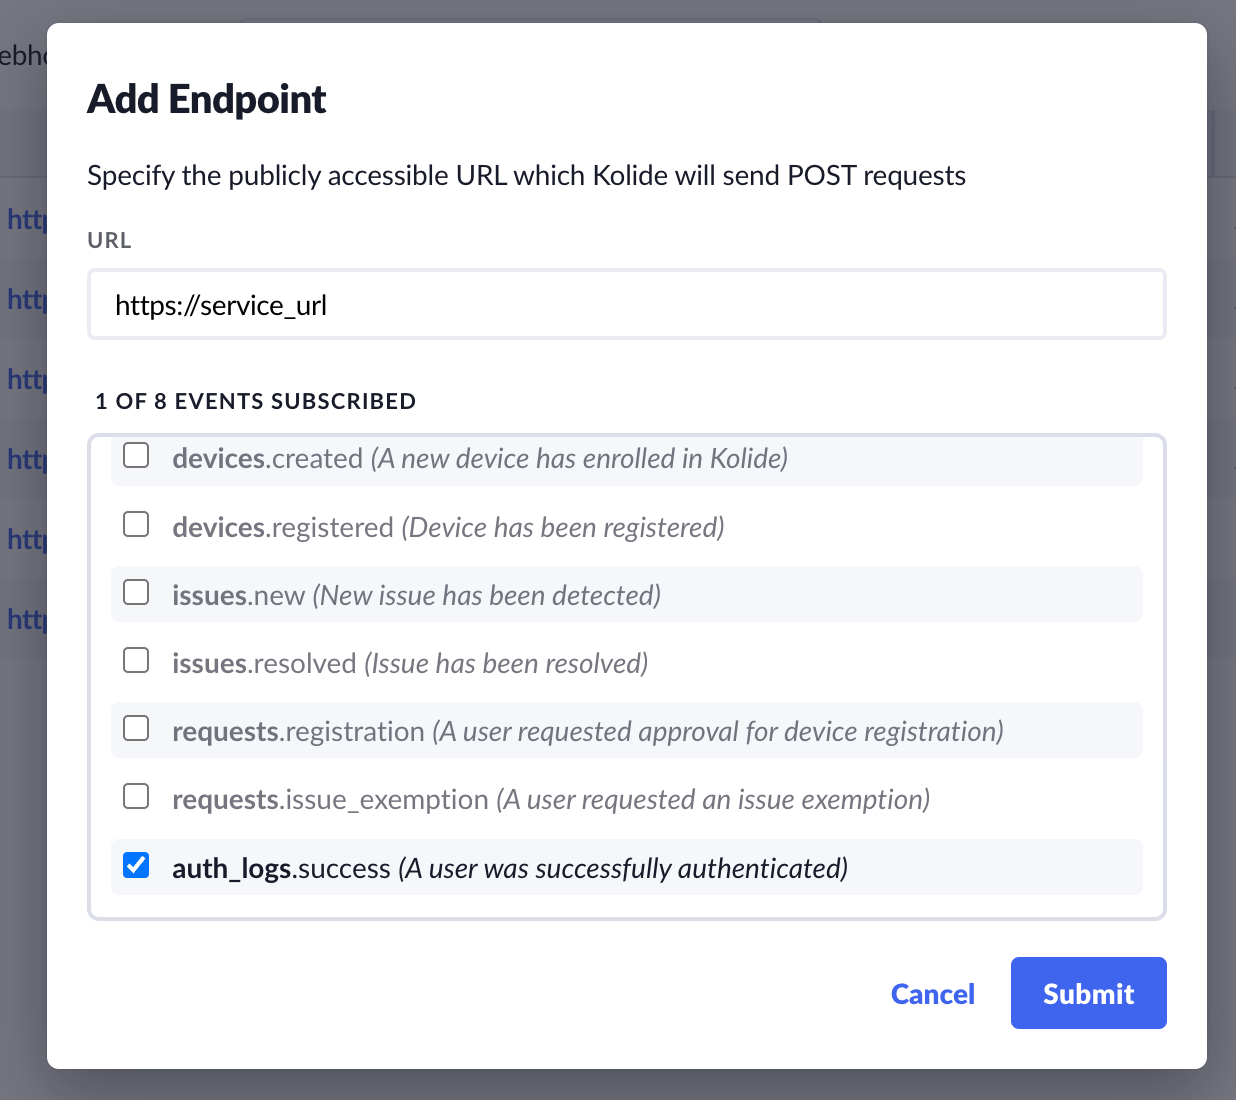 An image showing the modal that appears after a user clicks the "add endpoint" button. This modal has the checkbox for 'auth_log.success' checked.